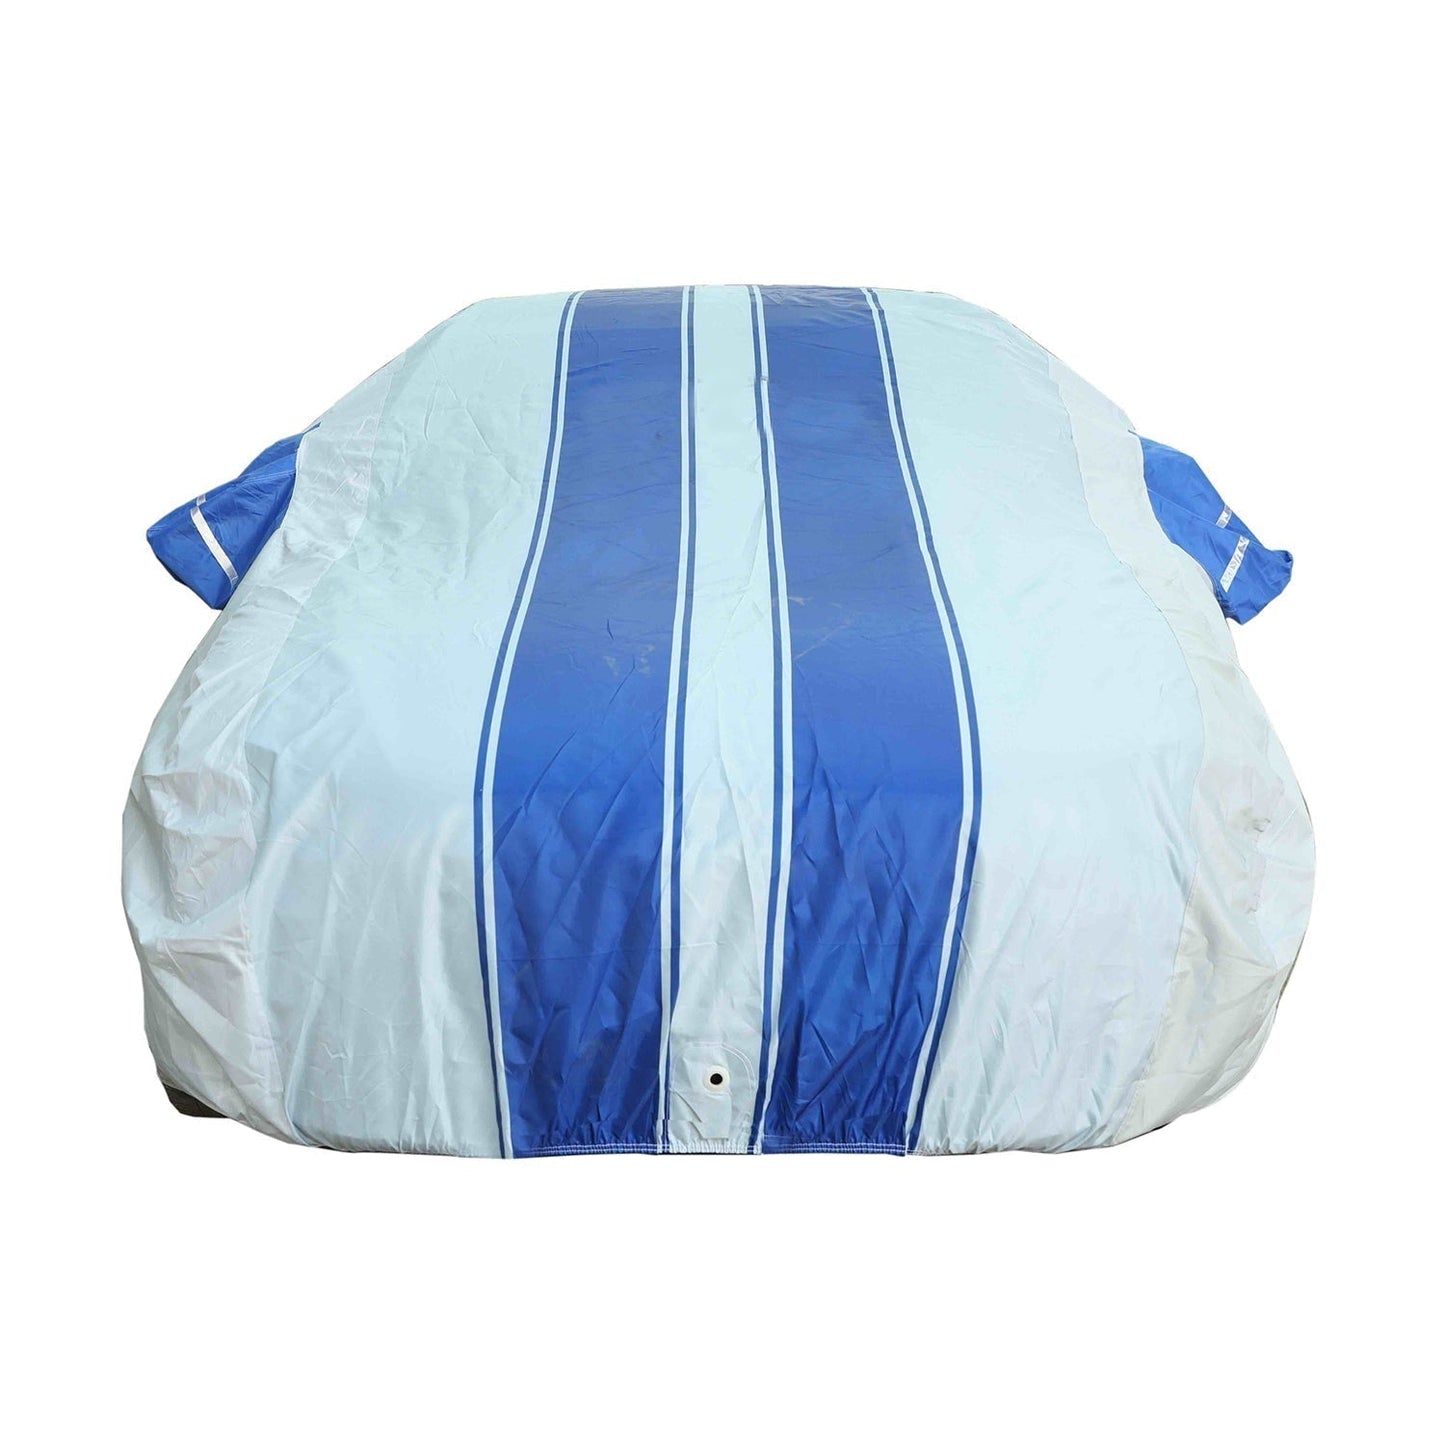 Oshotto 100% Blue dustproof and Water Resistant Car Body Cover with Mirror Pockets For Tata Indigo Manza